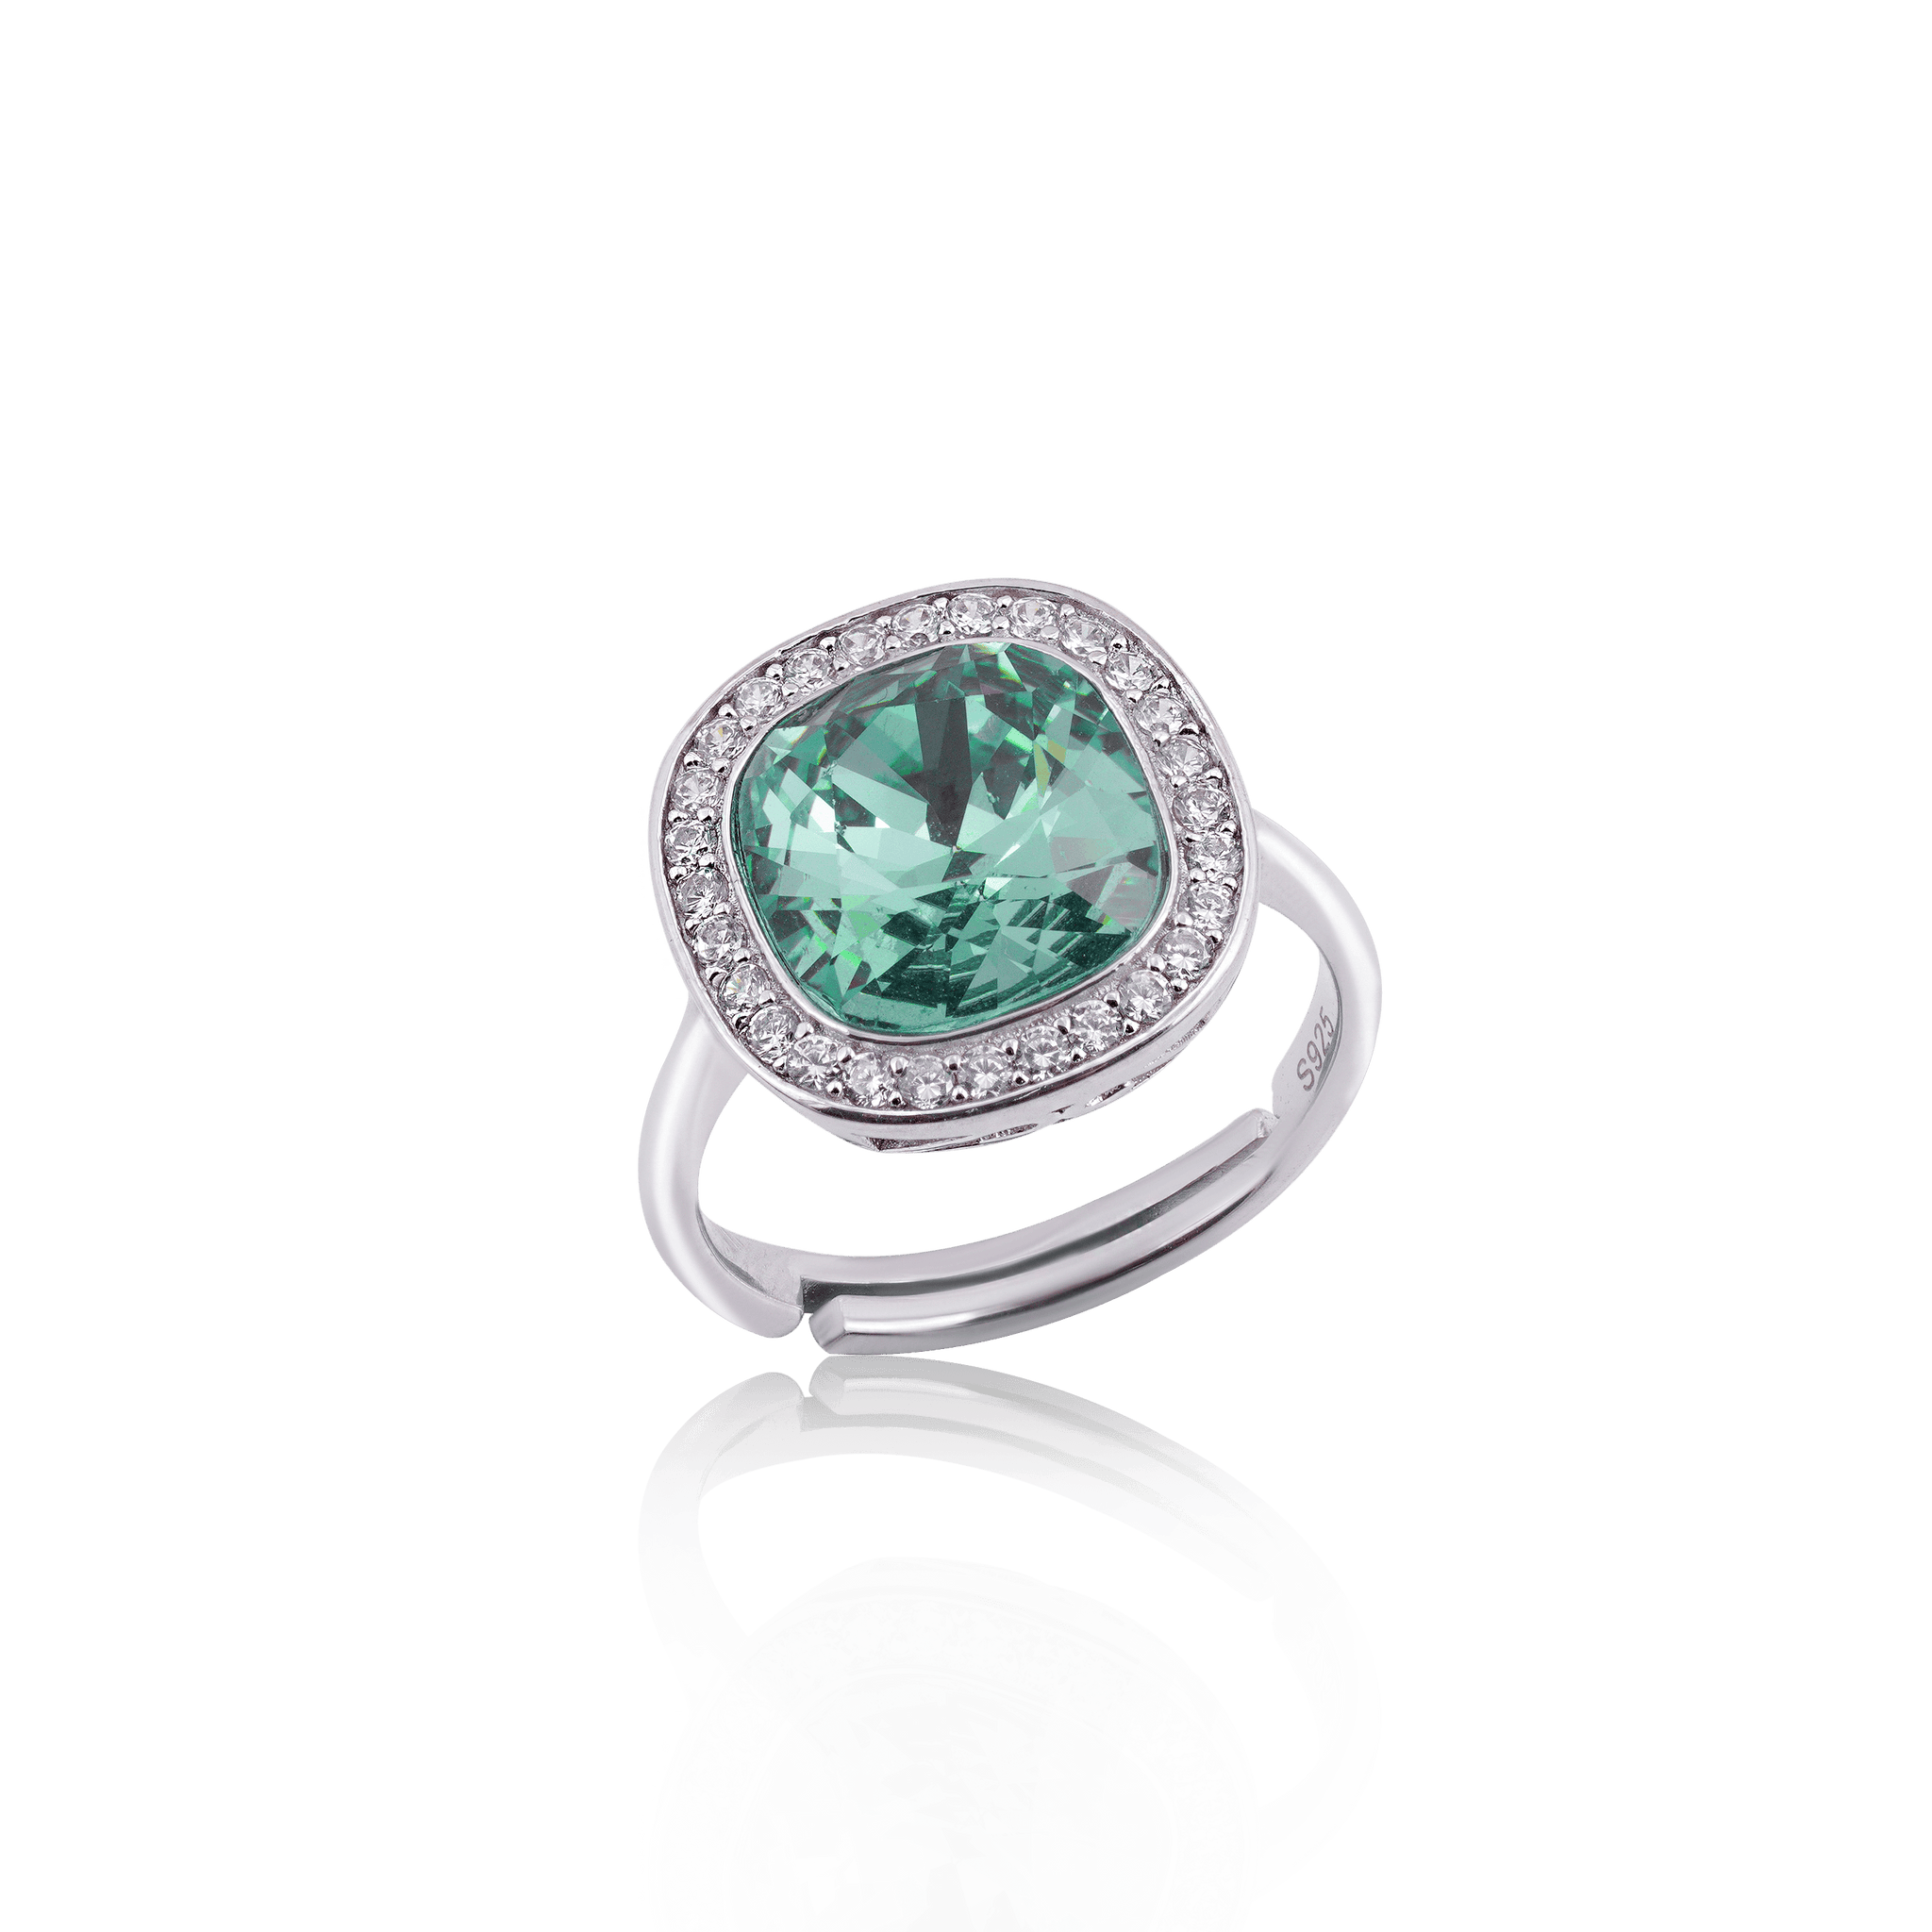 Dazzling Vivid Green Tourmaline Halo Setting Engagement Ring Gift For Her In 925 Silver - YANA SILVER